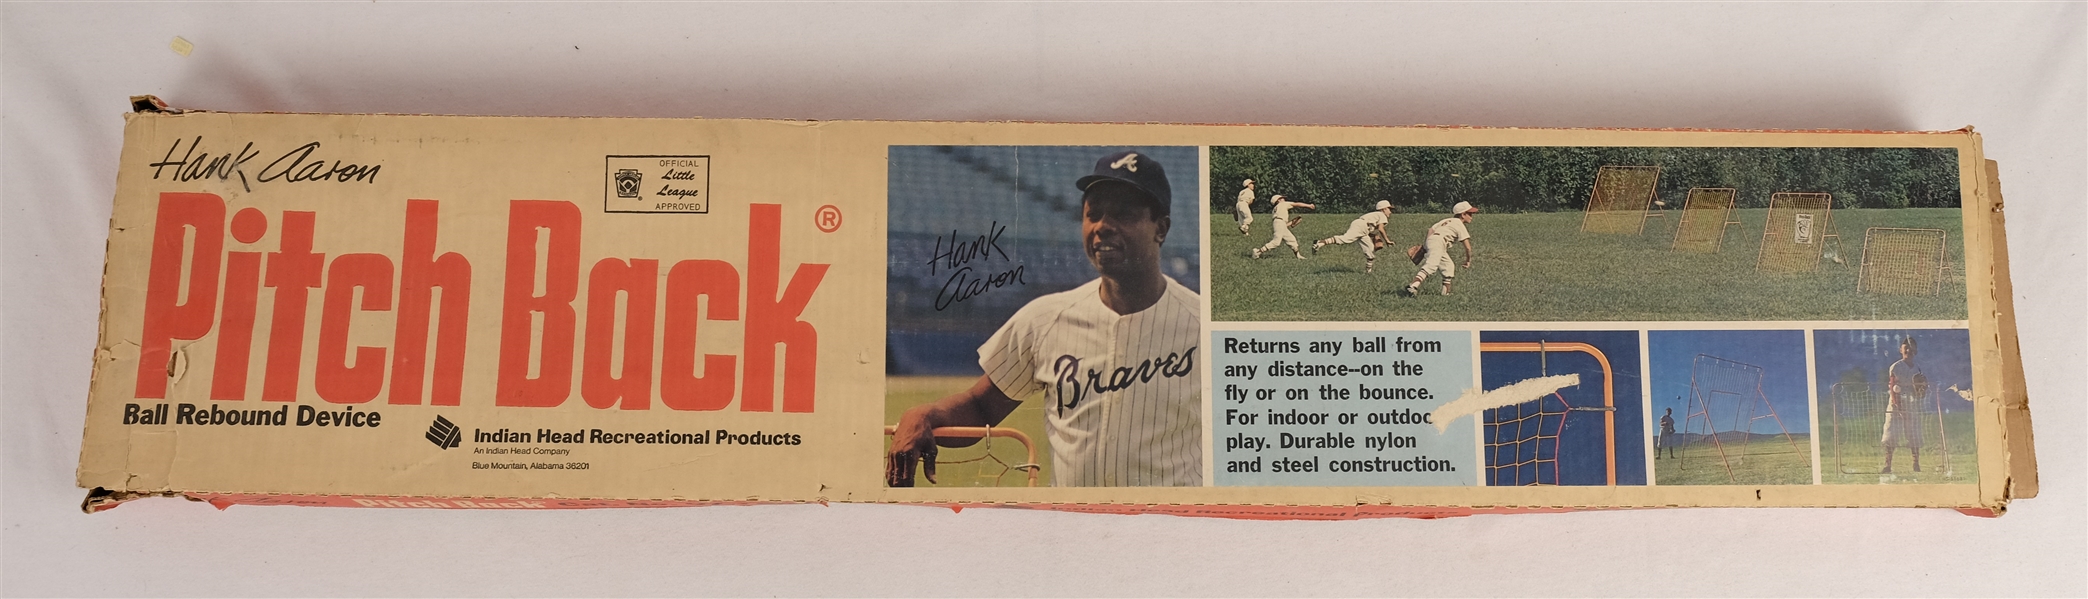 Hank Aaron 1970-71 Pitchback Pitching Device